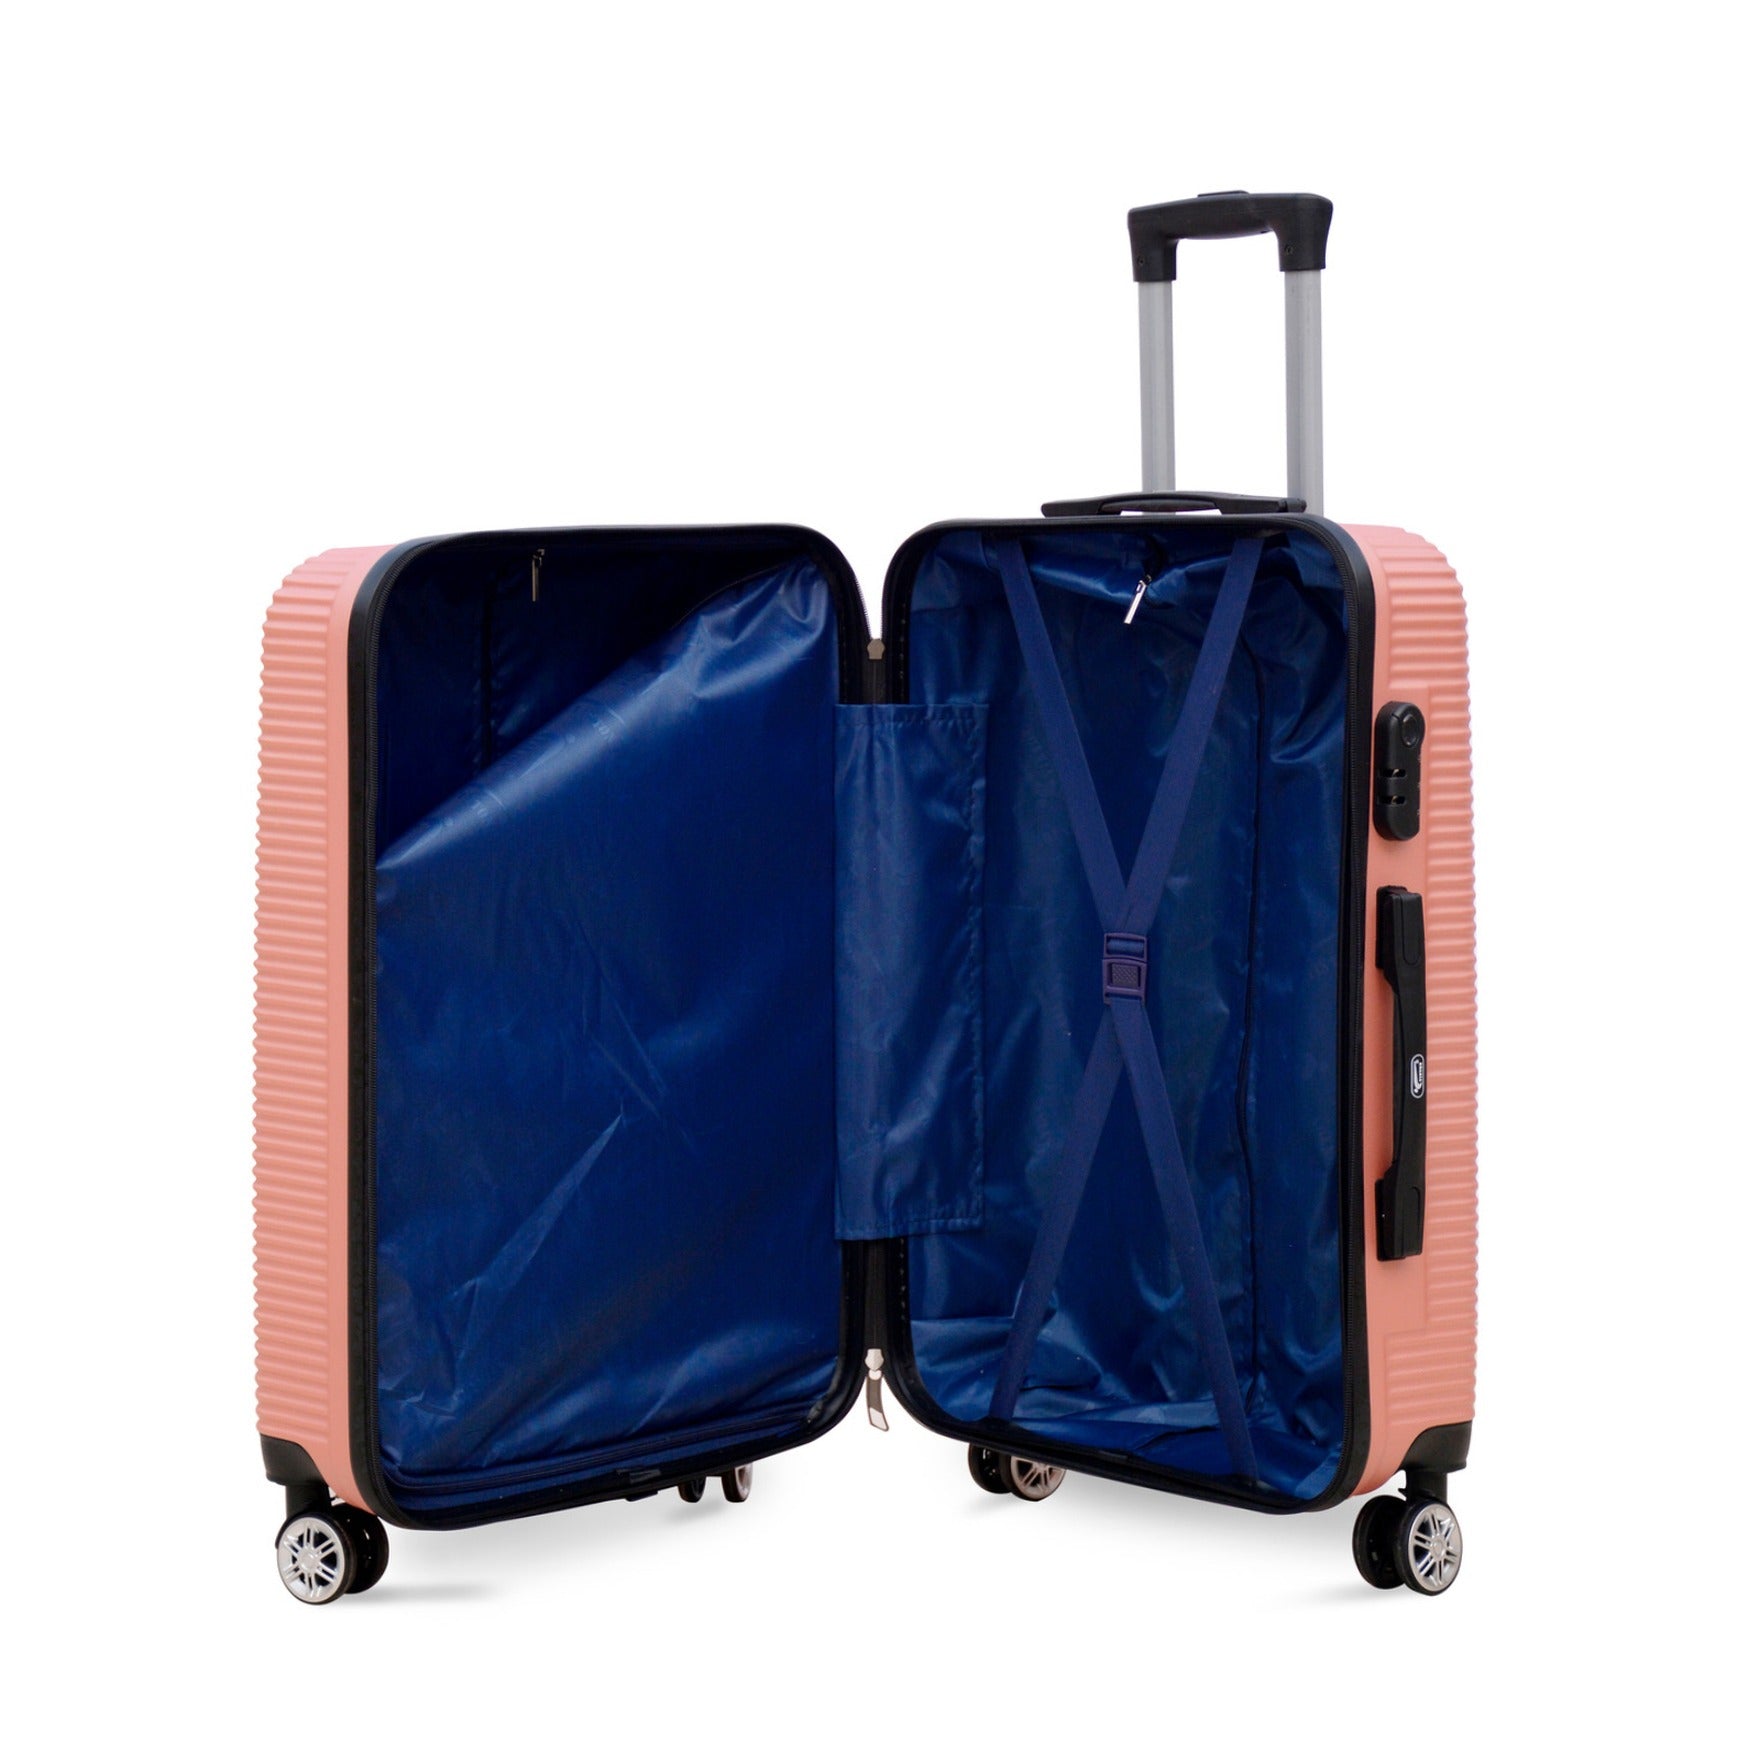 20" Dark Pink Colour JIAN ABS Line Luggage Lightweight Hard Case Carry On Trolley Bag With Spinner Wheel